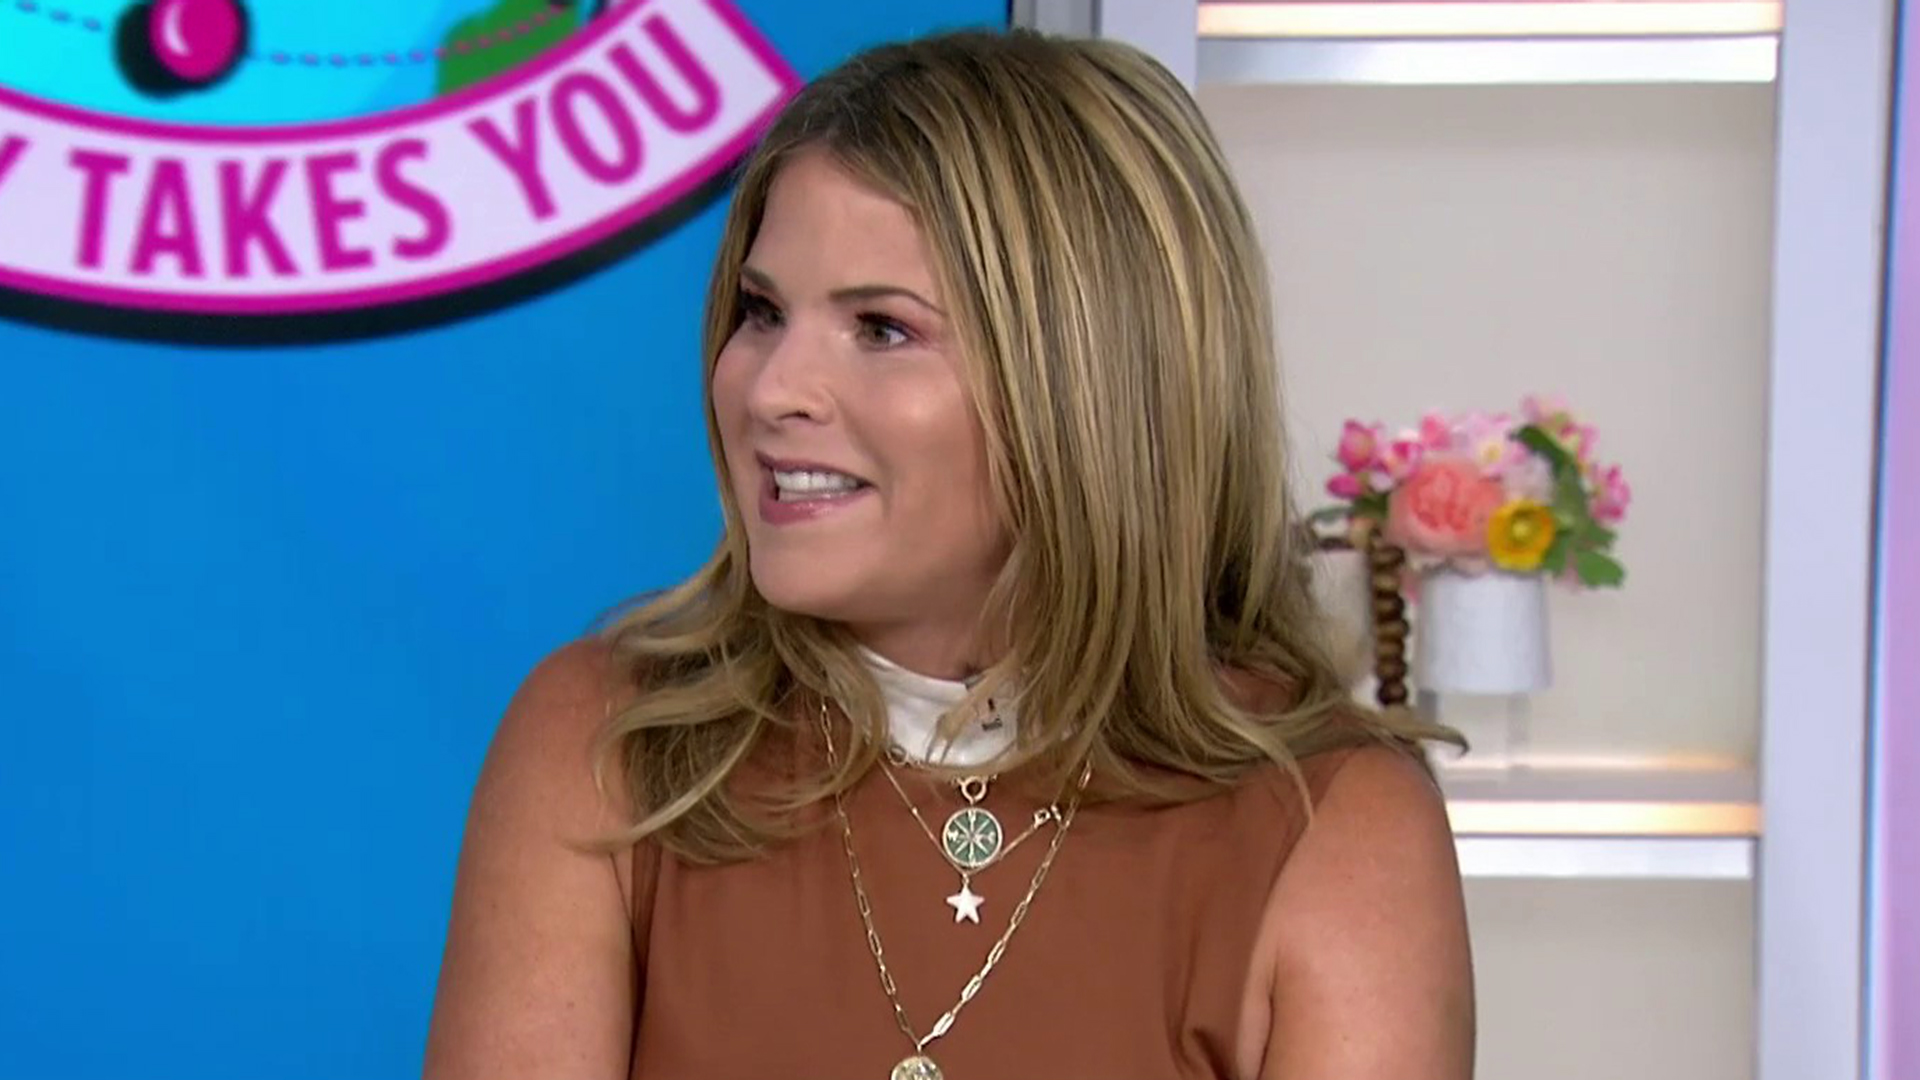 Jenna Bush Hager shares memories from white water rafting trip with mom.